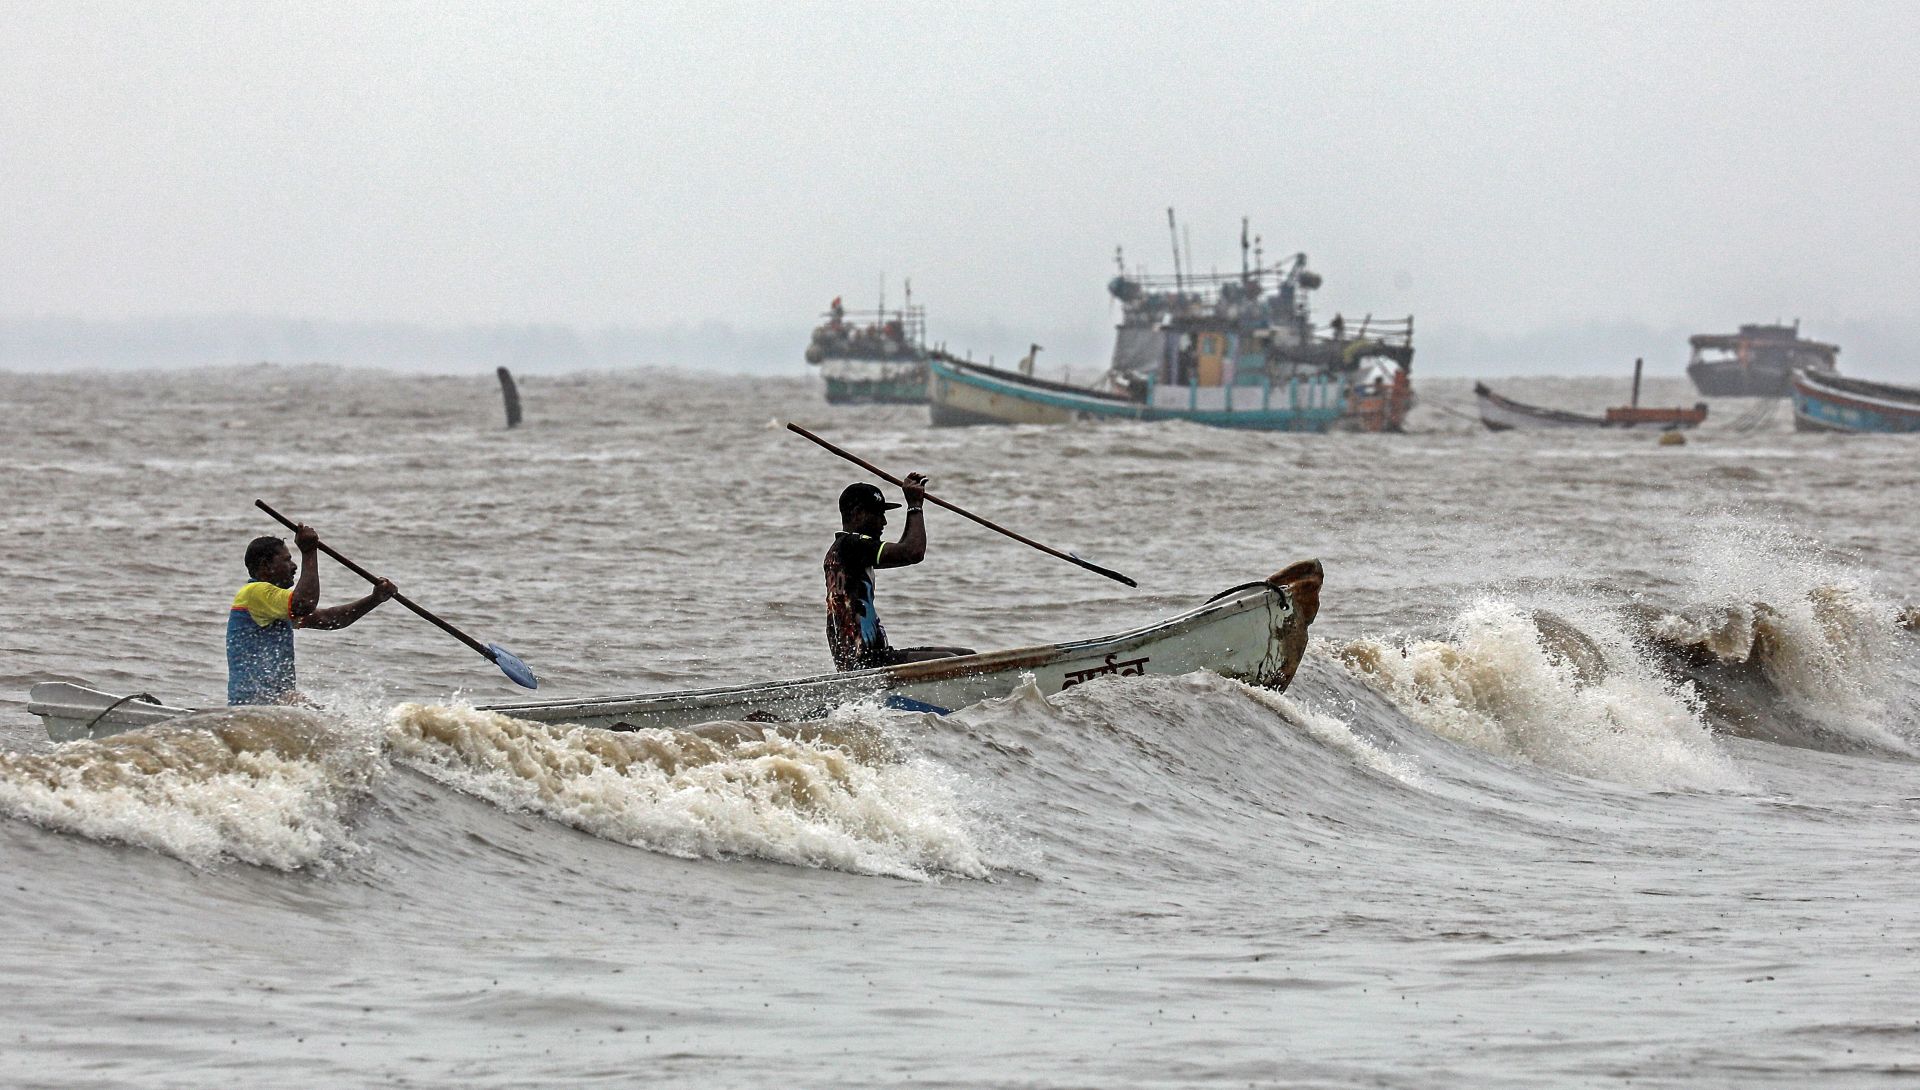 epa08462061 Indian fishermen arrives at the Arabian sea shore, at the Uttan village, near Mumbai, India, 03 June 2020. The India Meteorological Department (IMD) has advised fishermen not to venture out to sea along the coast of Maharashtra as a precaution against approaching tropical cyclone Nisarga. The cyclone Nisarga will landfall in Mumbai on 03 June 2020.  EPA/DIVYAKANT SOLANKI